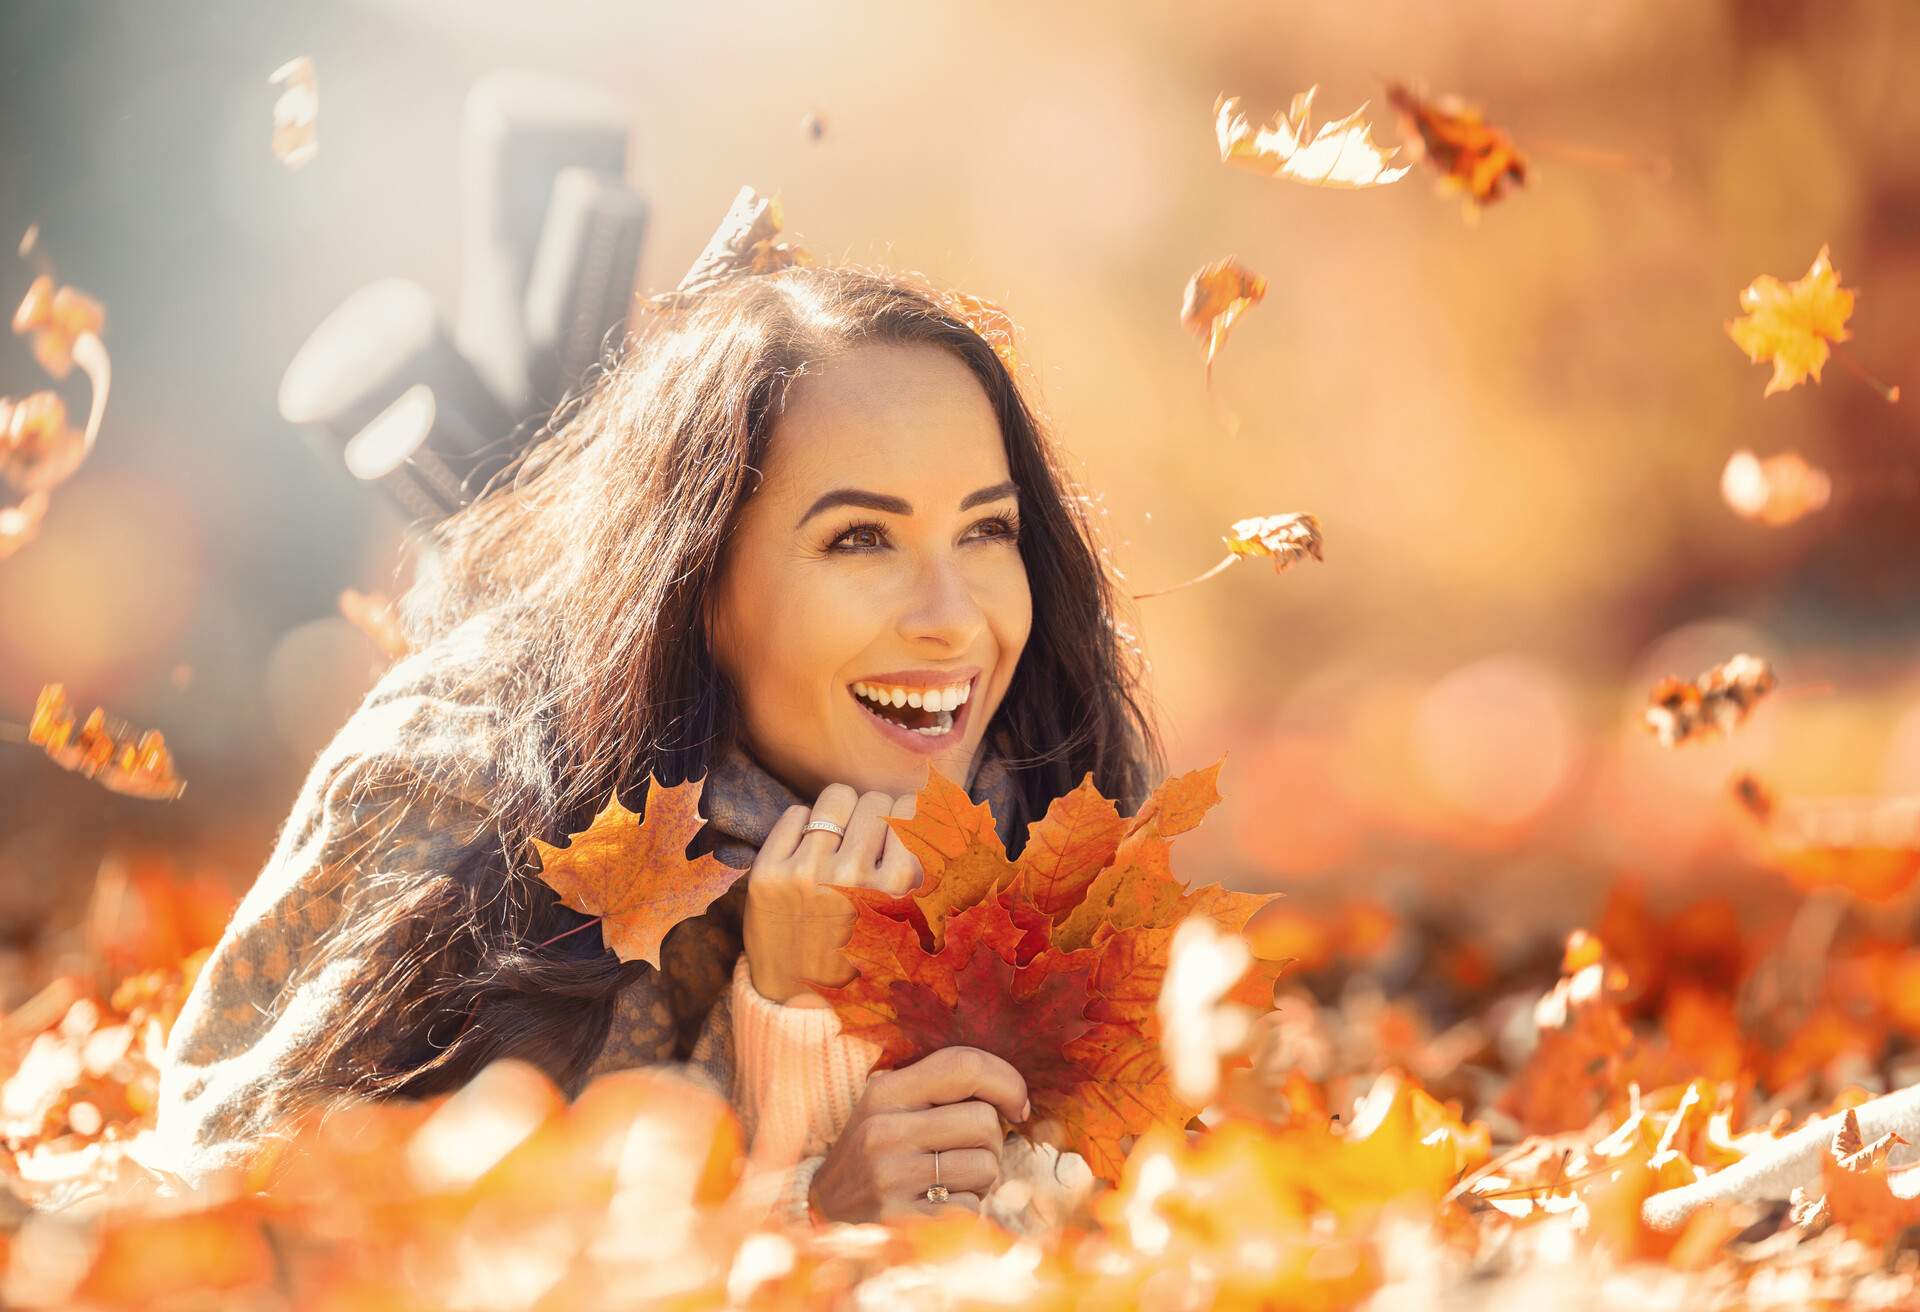 PERSON_WOMAN_AUTUMN_LEAVES